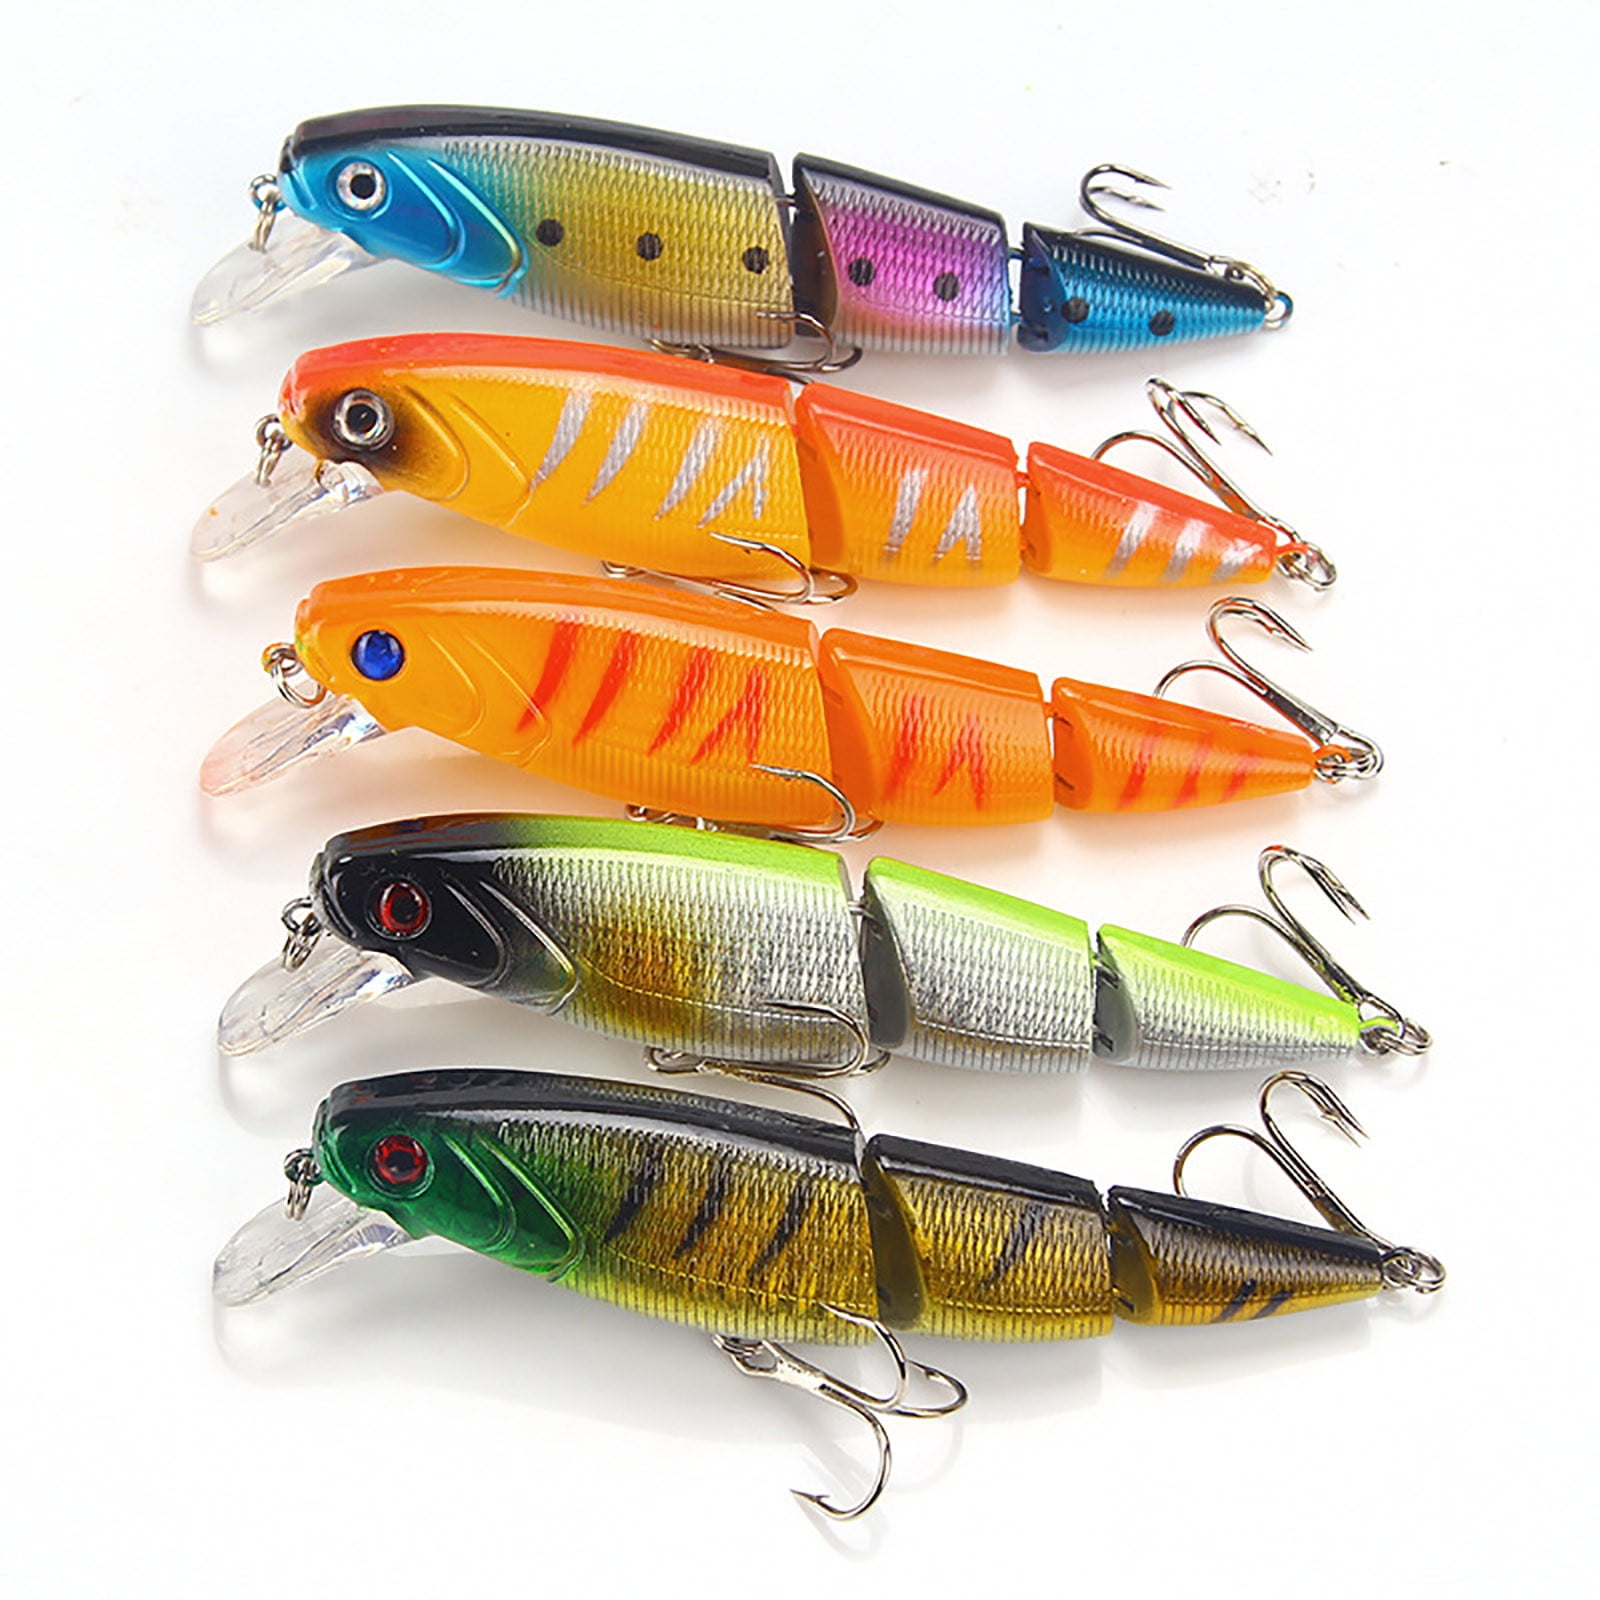 SDJMa 4.5 Fishing Lures for Bass Trout, Multi Jointed Swimbaits, Slow  Sinking Bionic Swimming Lures for Freshwater Saltwater Bass Lifelike  Fishing